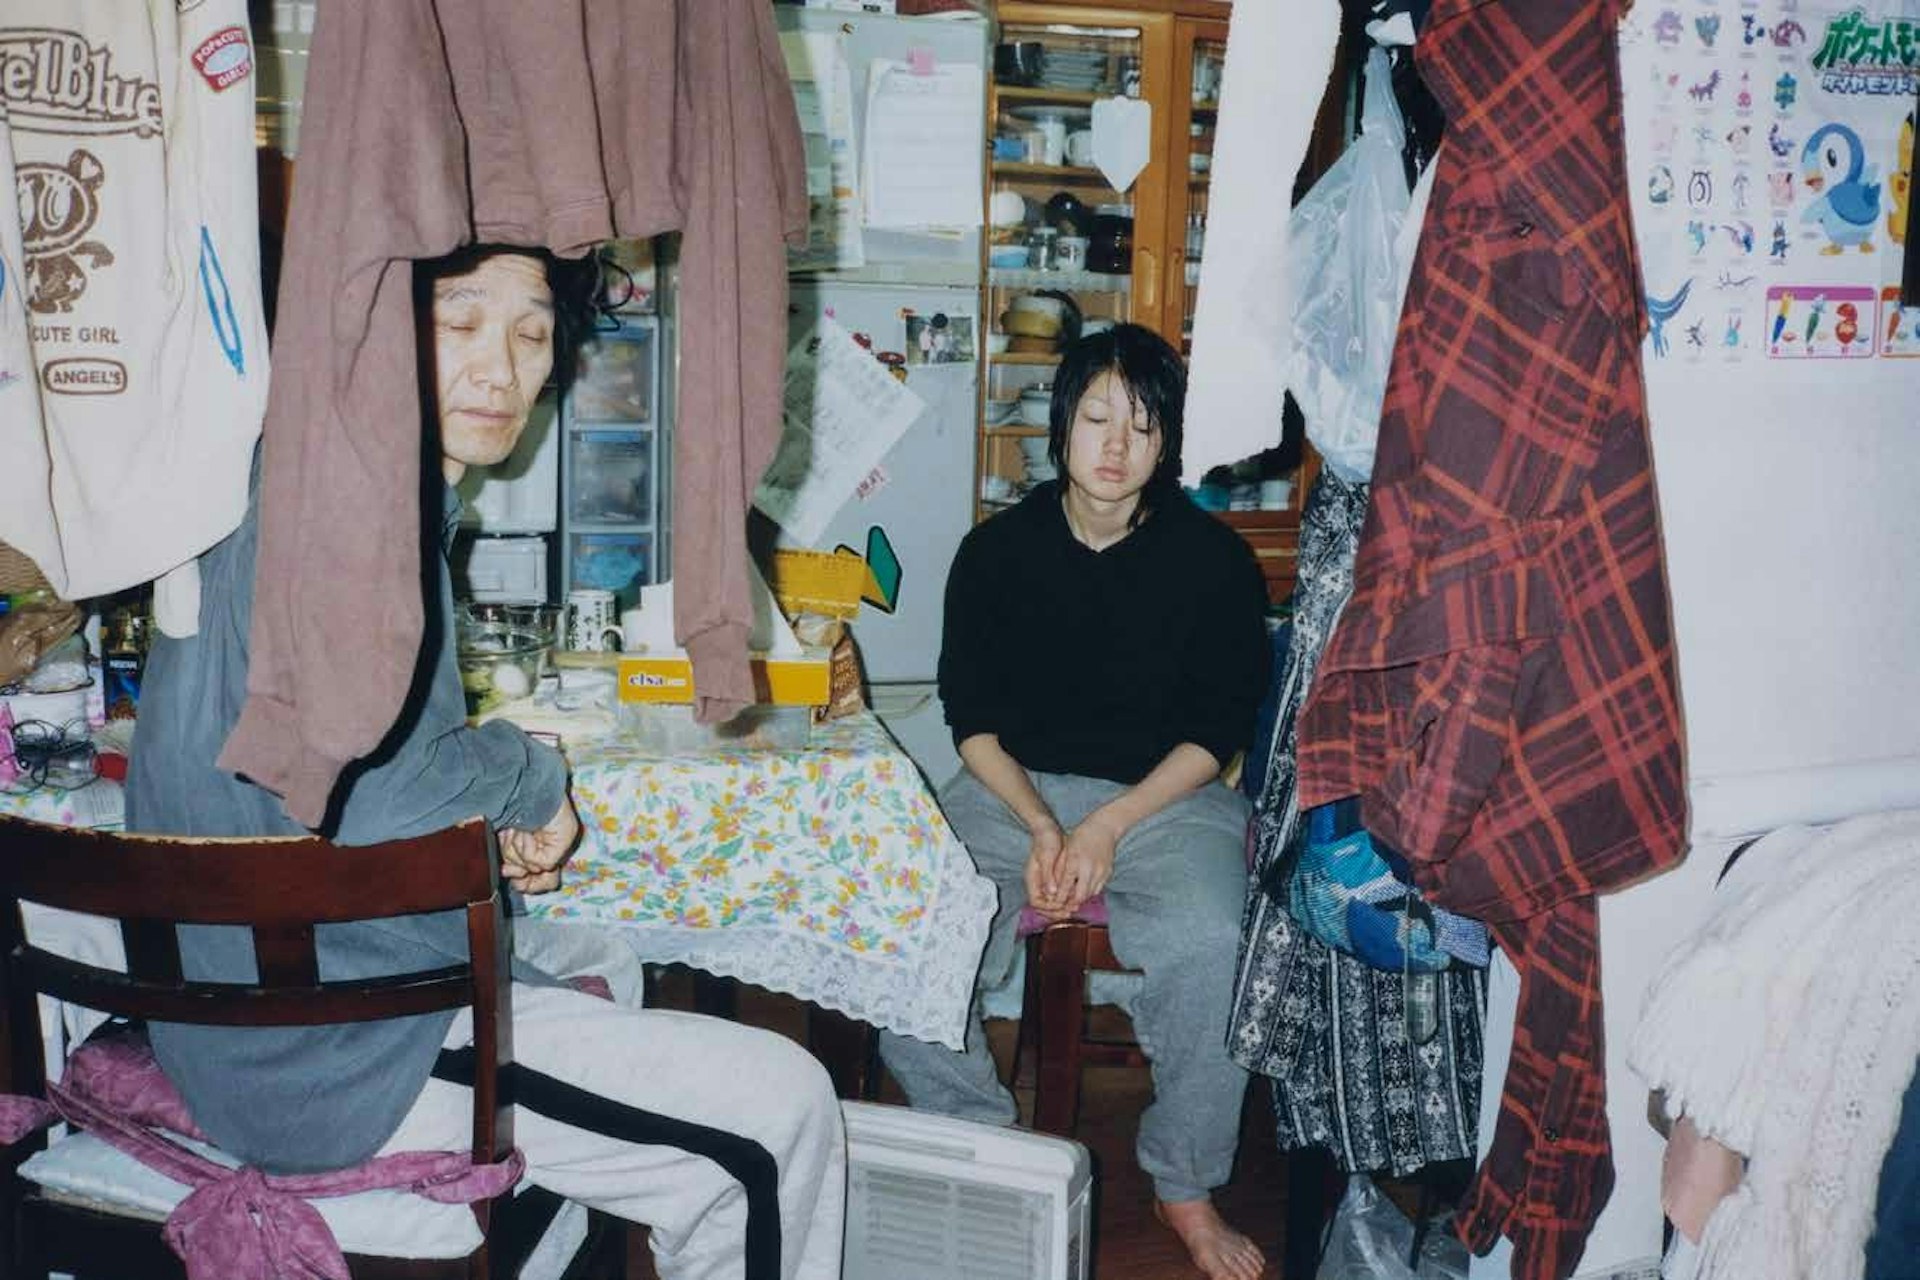 A humorous look at Japanese family life, in photos